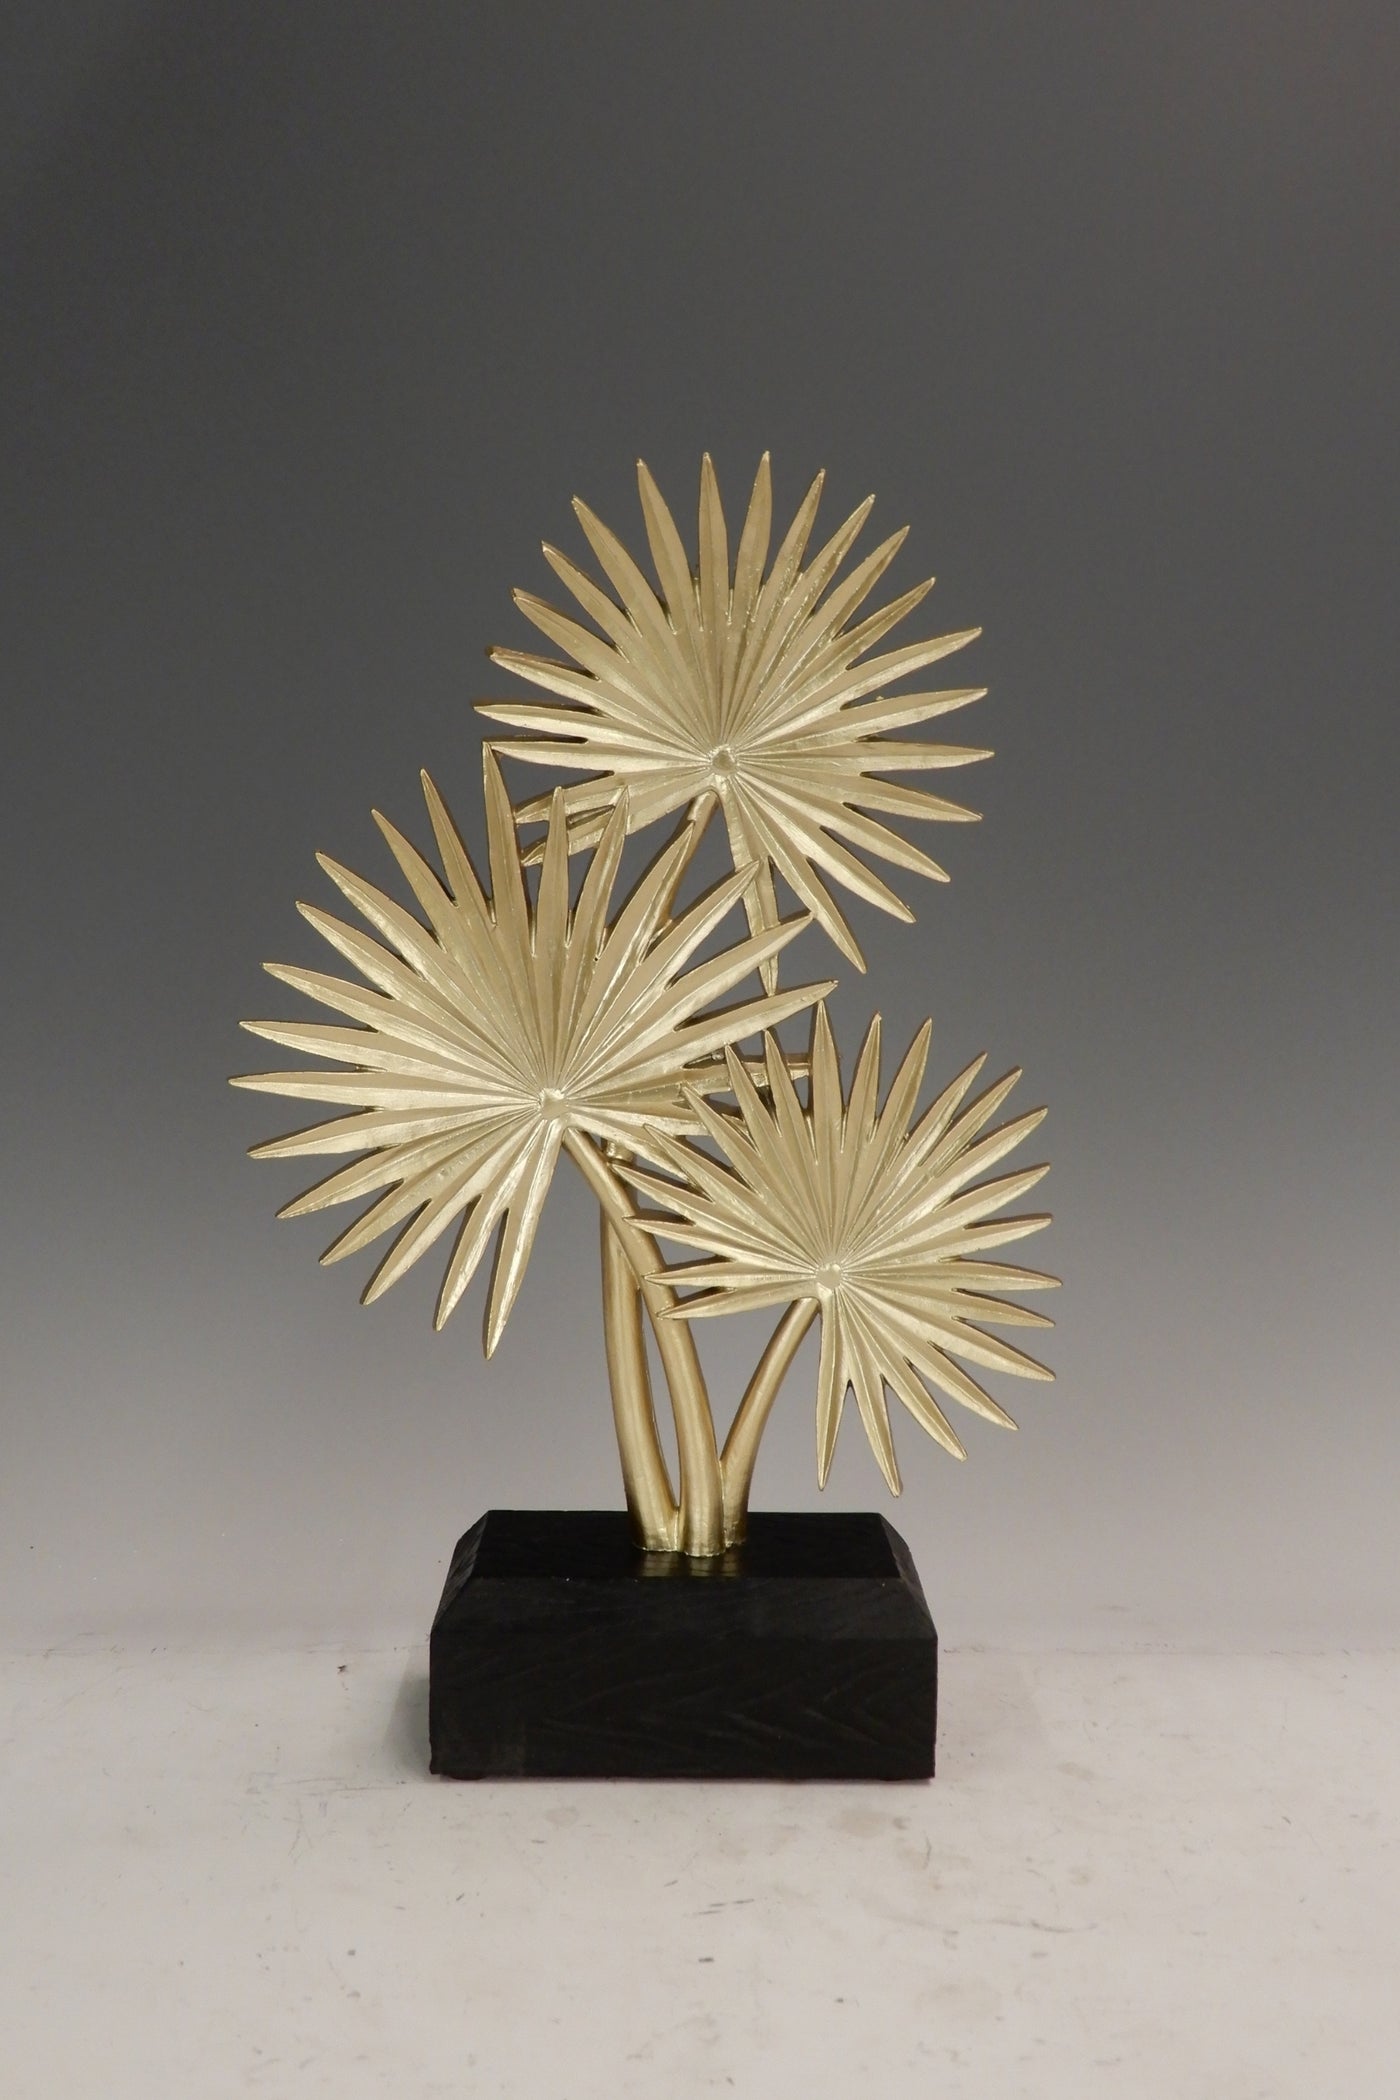 Fan Palm Leaf Sculpture for your home or office decor